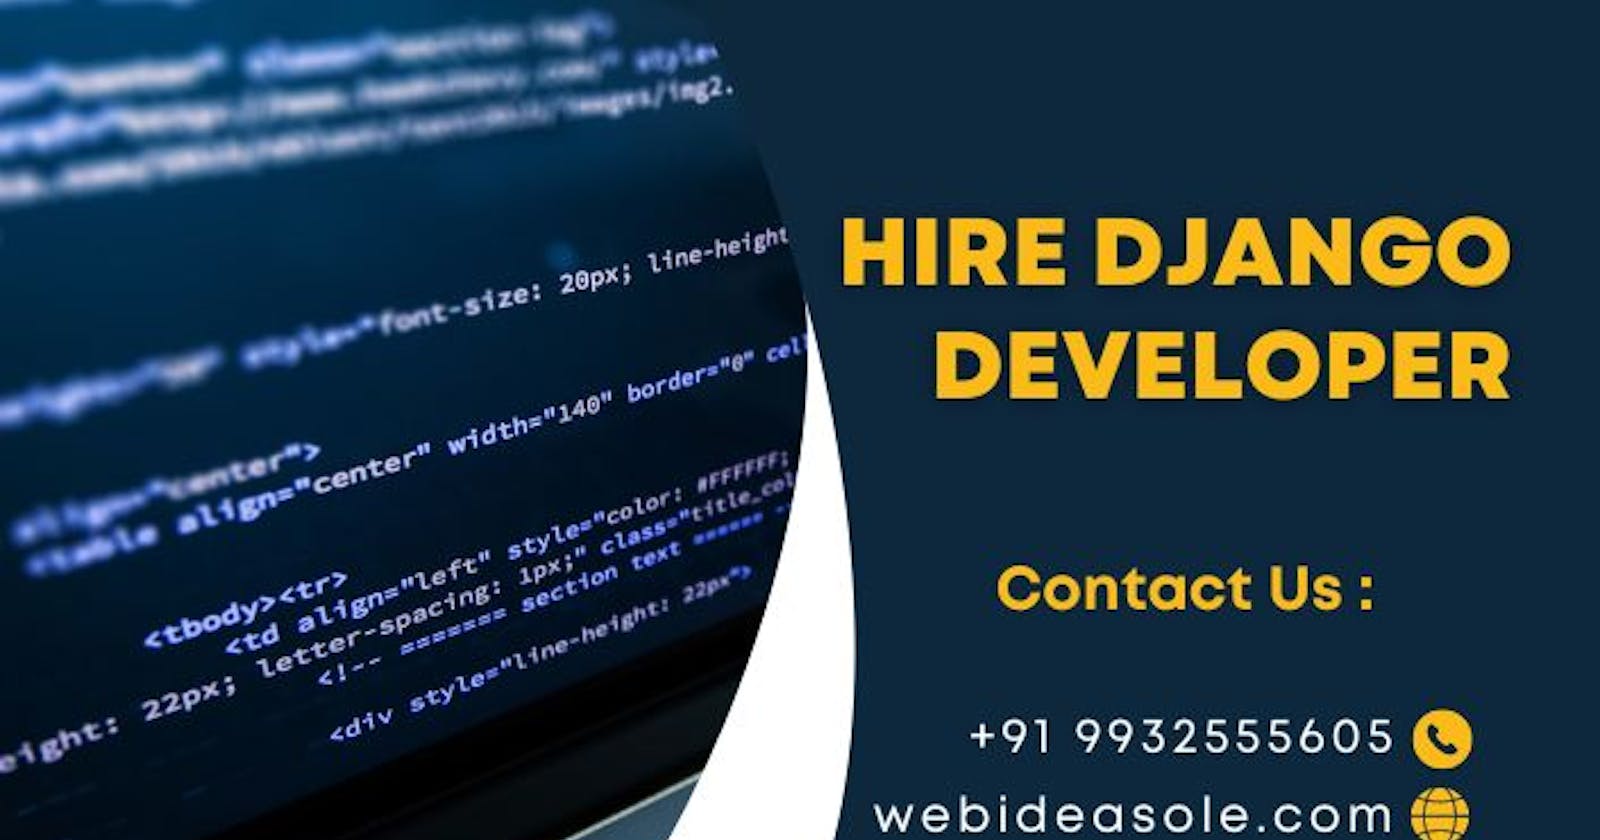 Hire Django developer to help you achieve your 2023 objectives!